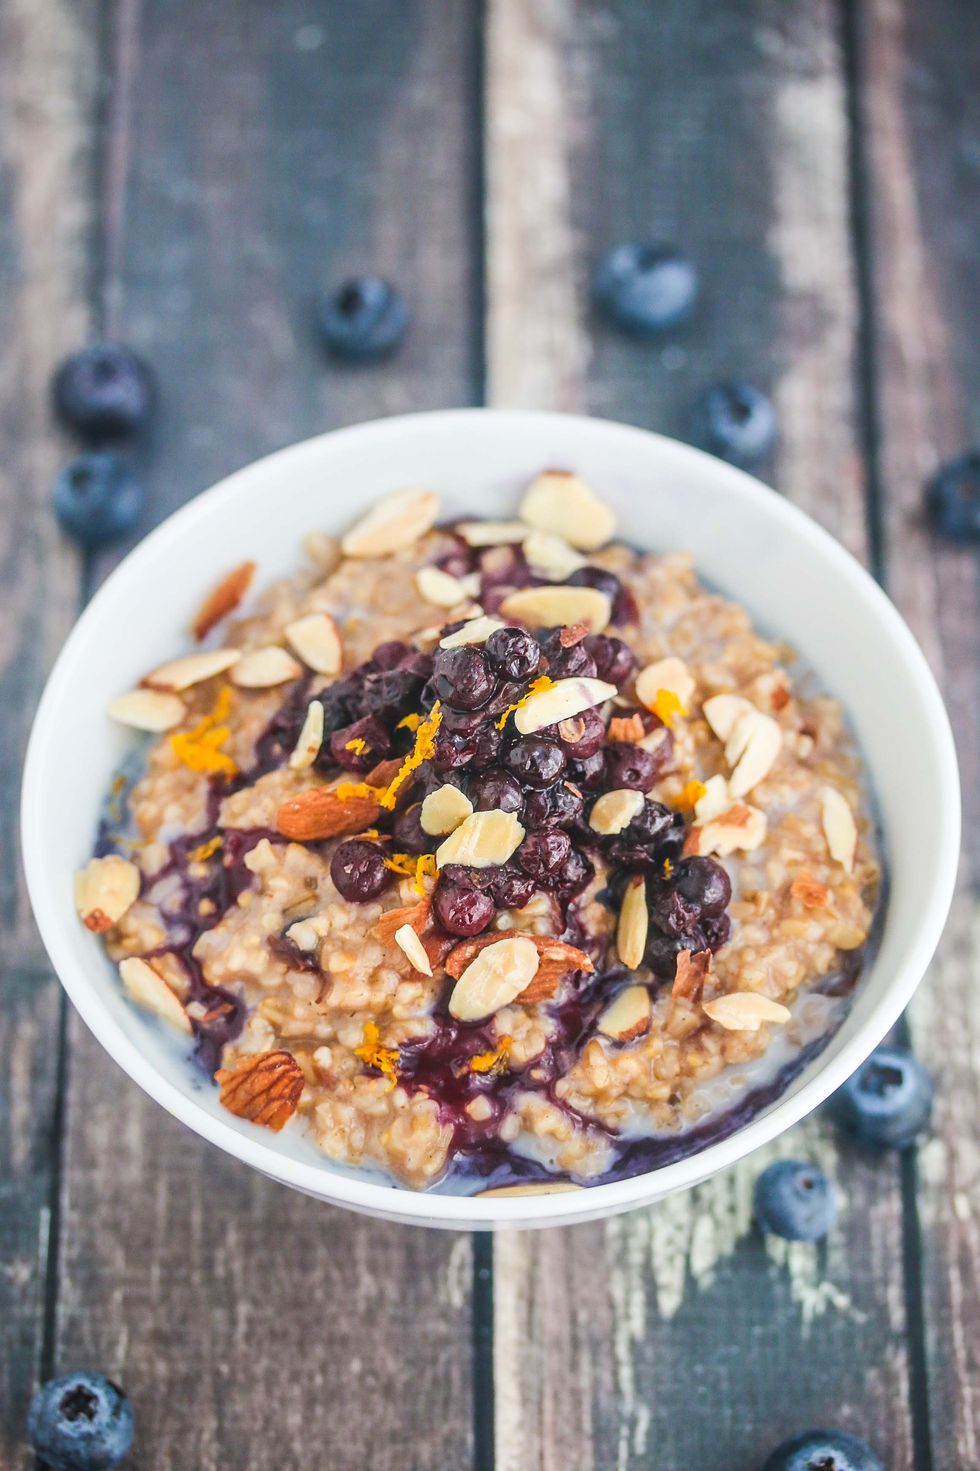 A Nutritionist's Guide to Rolled, Steel-Cut and Instant Oats, Nutrition